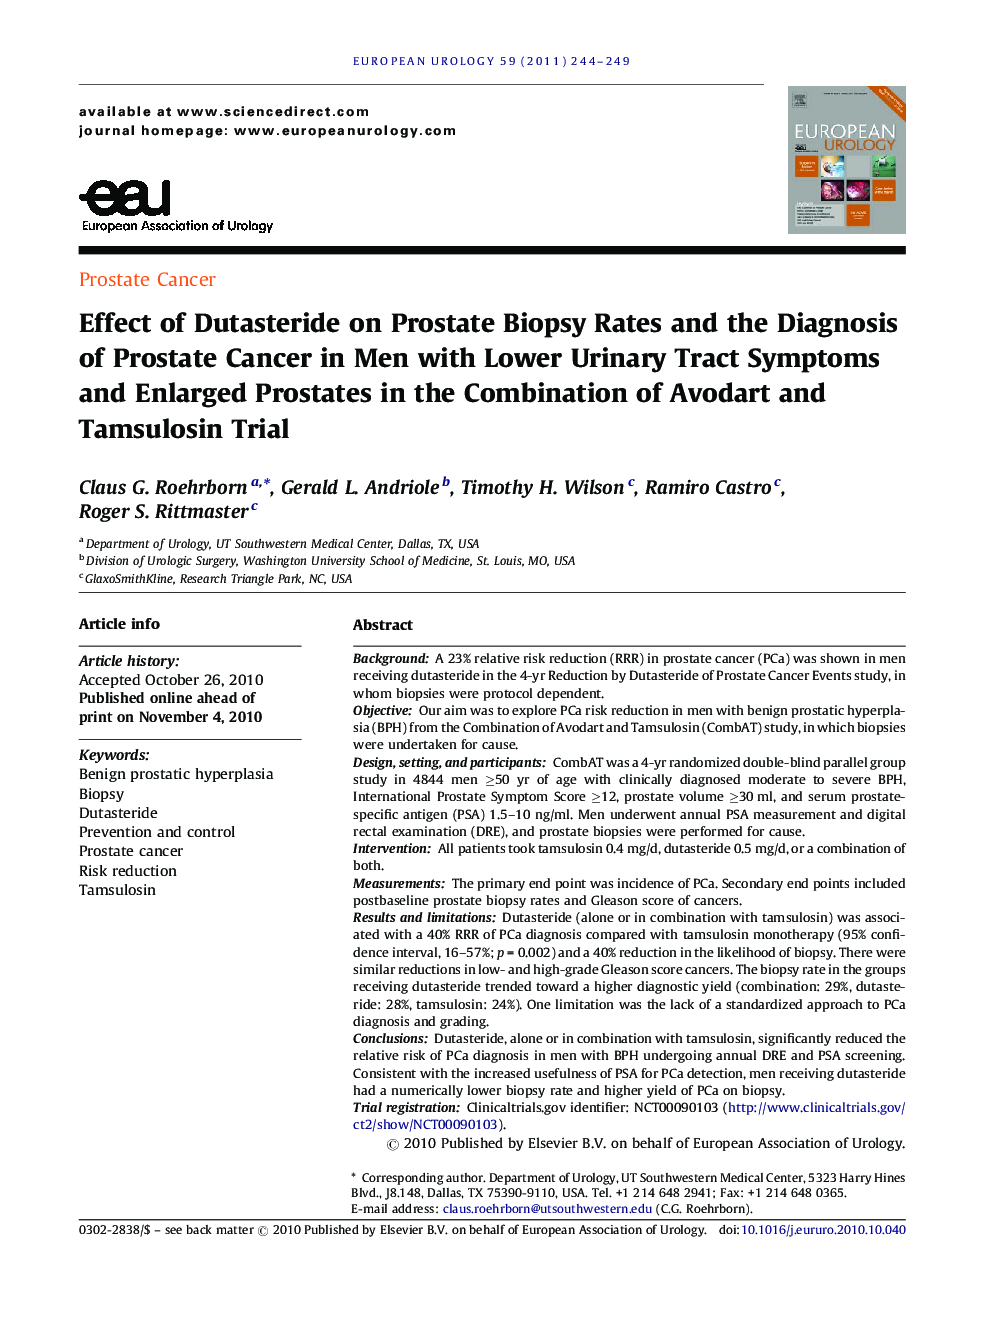 Effect of Dutasteride on Prostate Biopsy Rates and the Diagnosis of Prostate Cancer in Men with Lower Urinary Tract Symptoms and Enlarged Prostates in the Combination of Avodart and Tamsulosin Trial